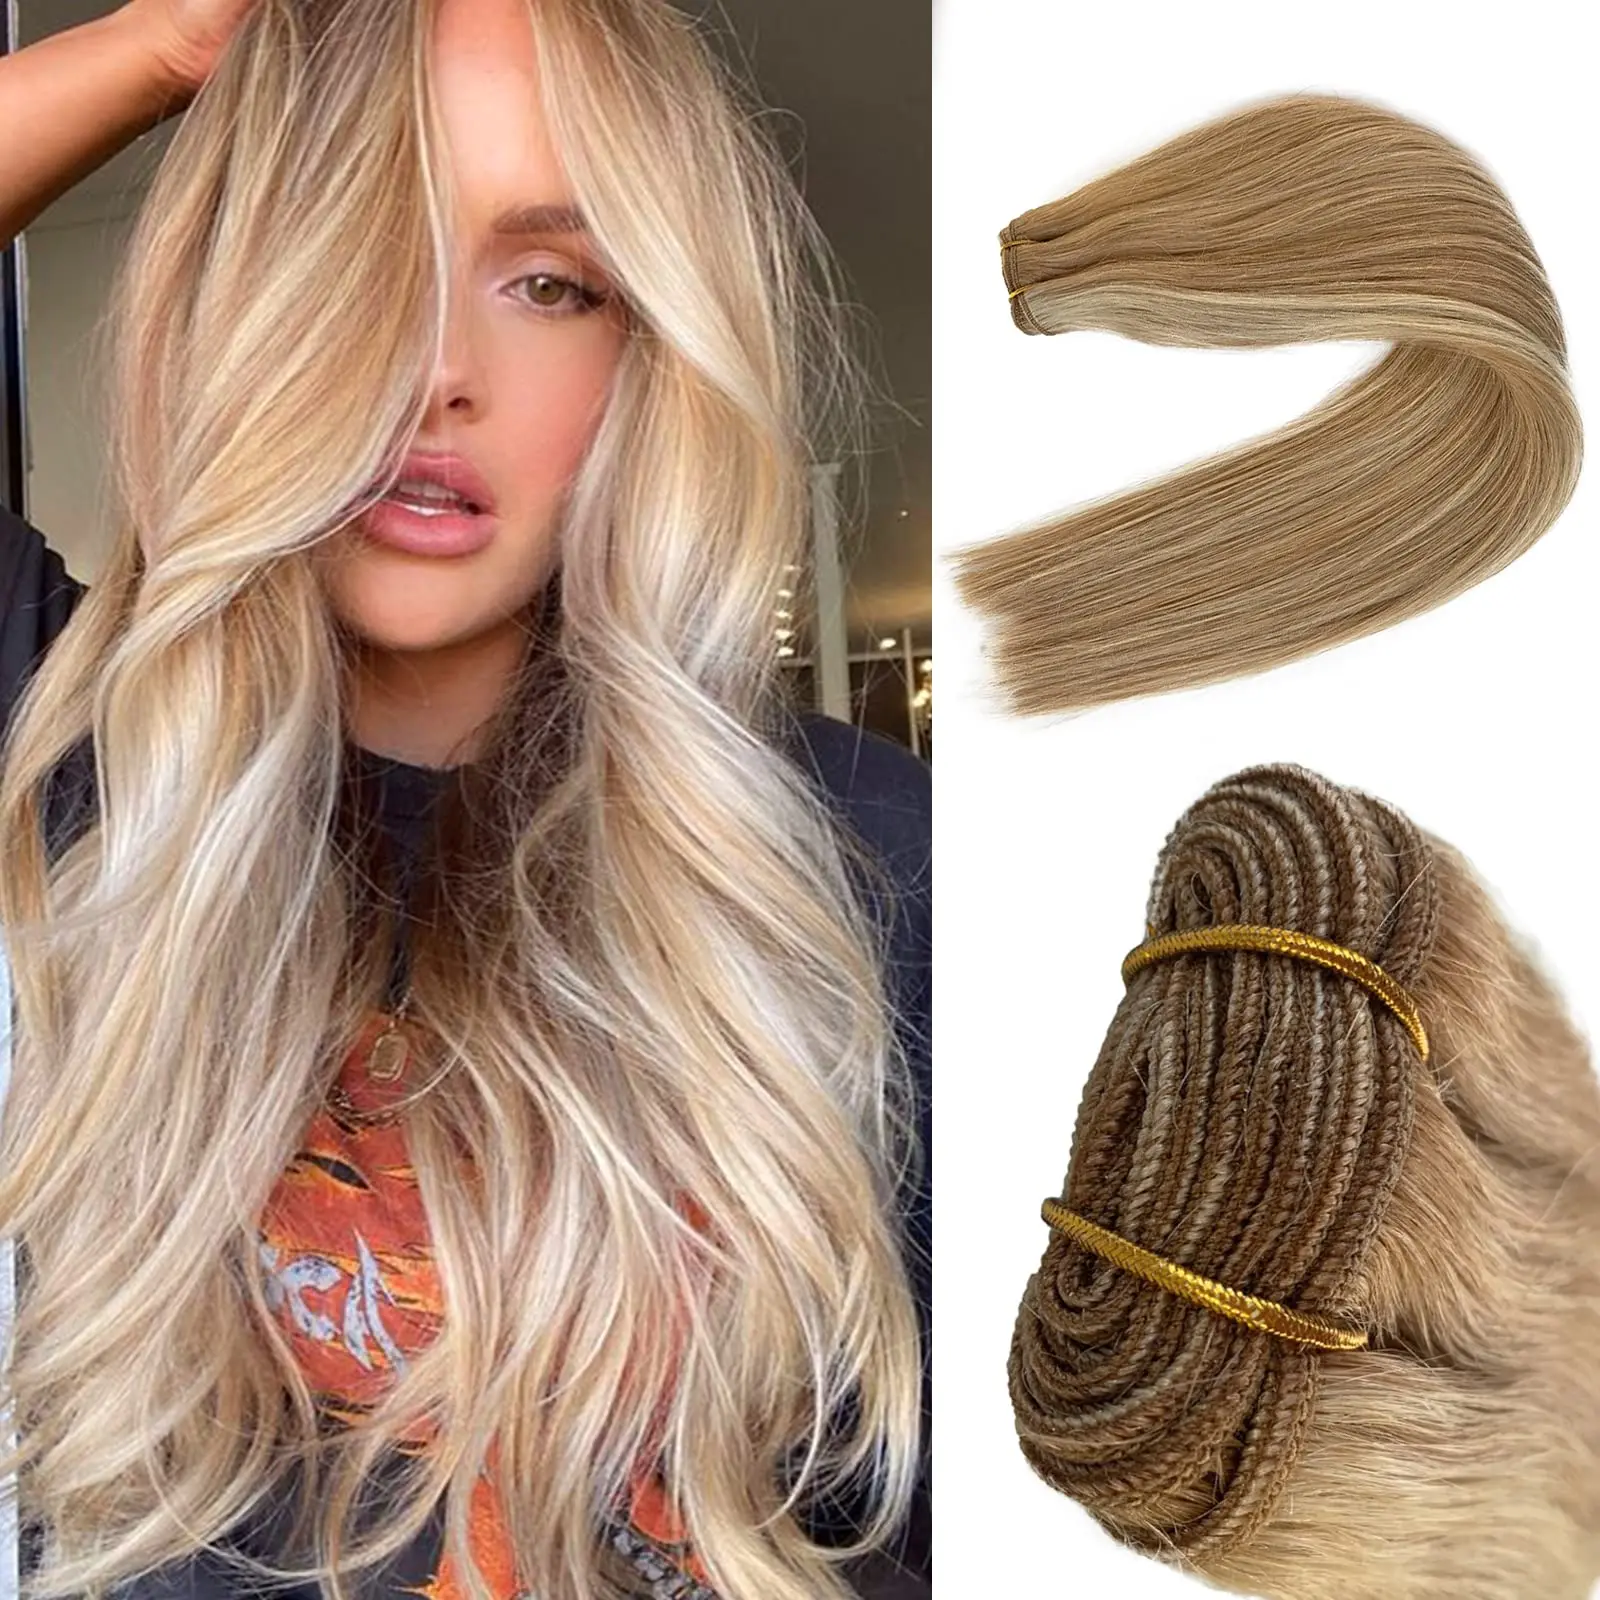 Blonde Weft Hair Extensions Sew in Human Hair Weft Extensions Balayage Highlights Brazilian Remy Bundle Sew in Real Hair Weave